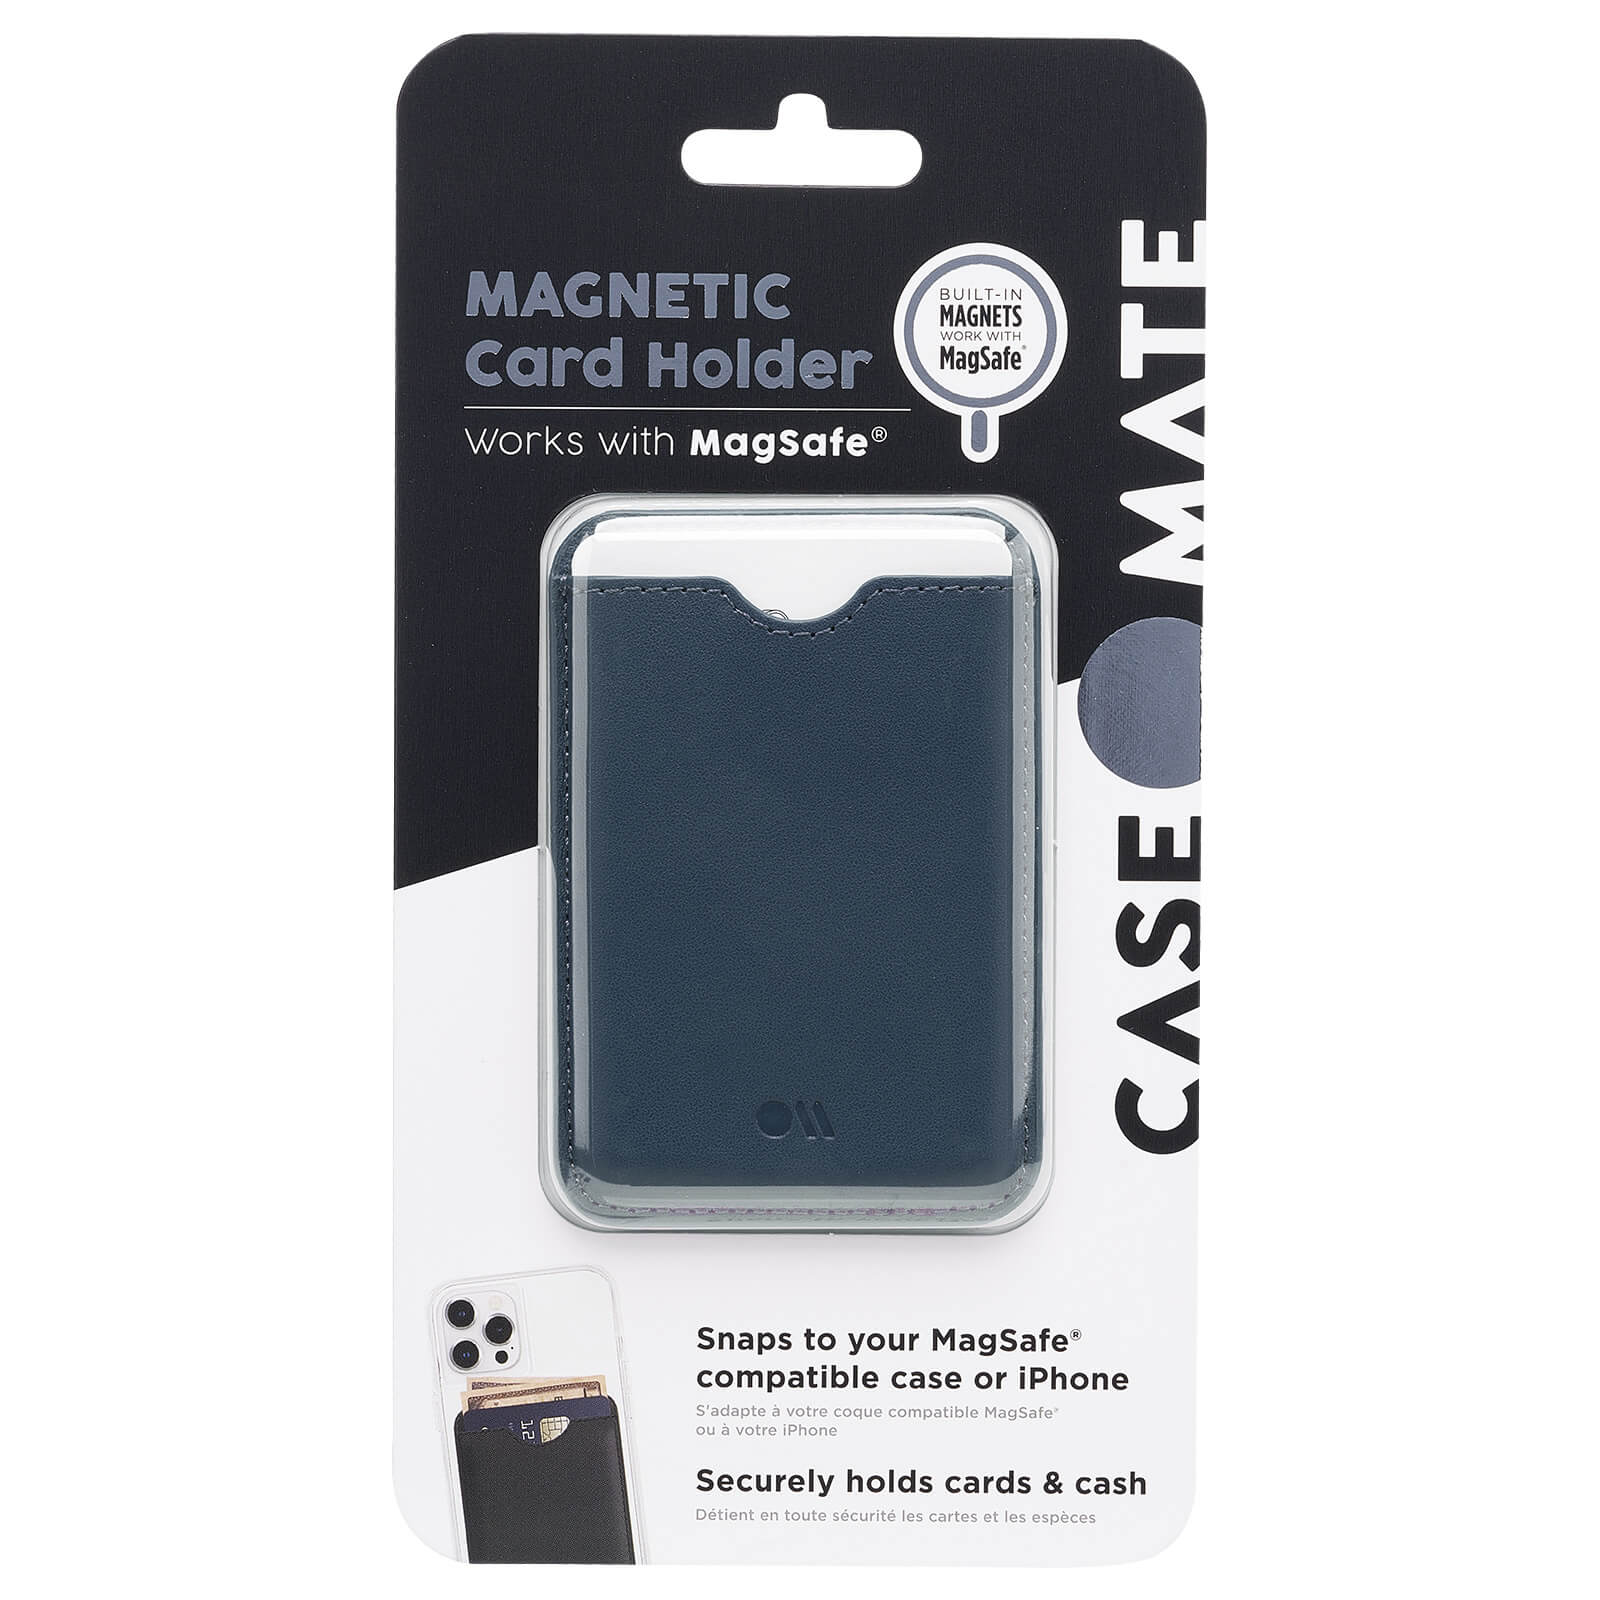 Magnetic Card Holder works with MagSafe. Built in Magnets work with MagSafe. Snaps to your MagSafe compatible case or iPhone. Securely holds cards & cash. color::Admiral Blue